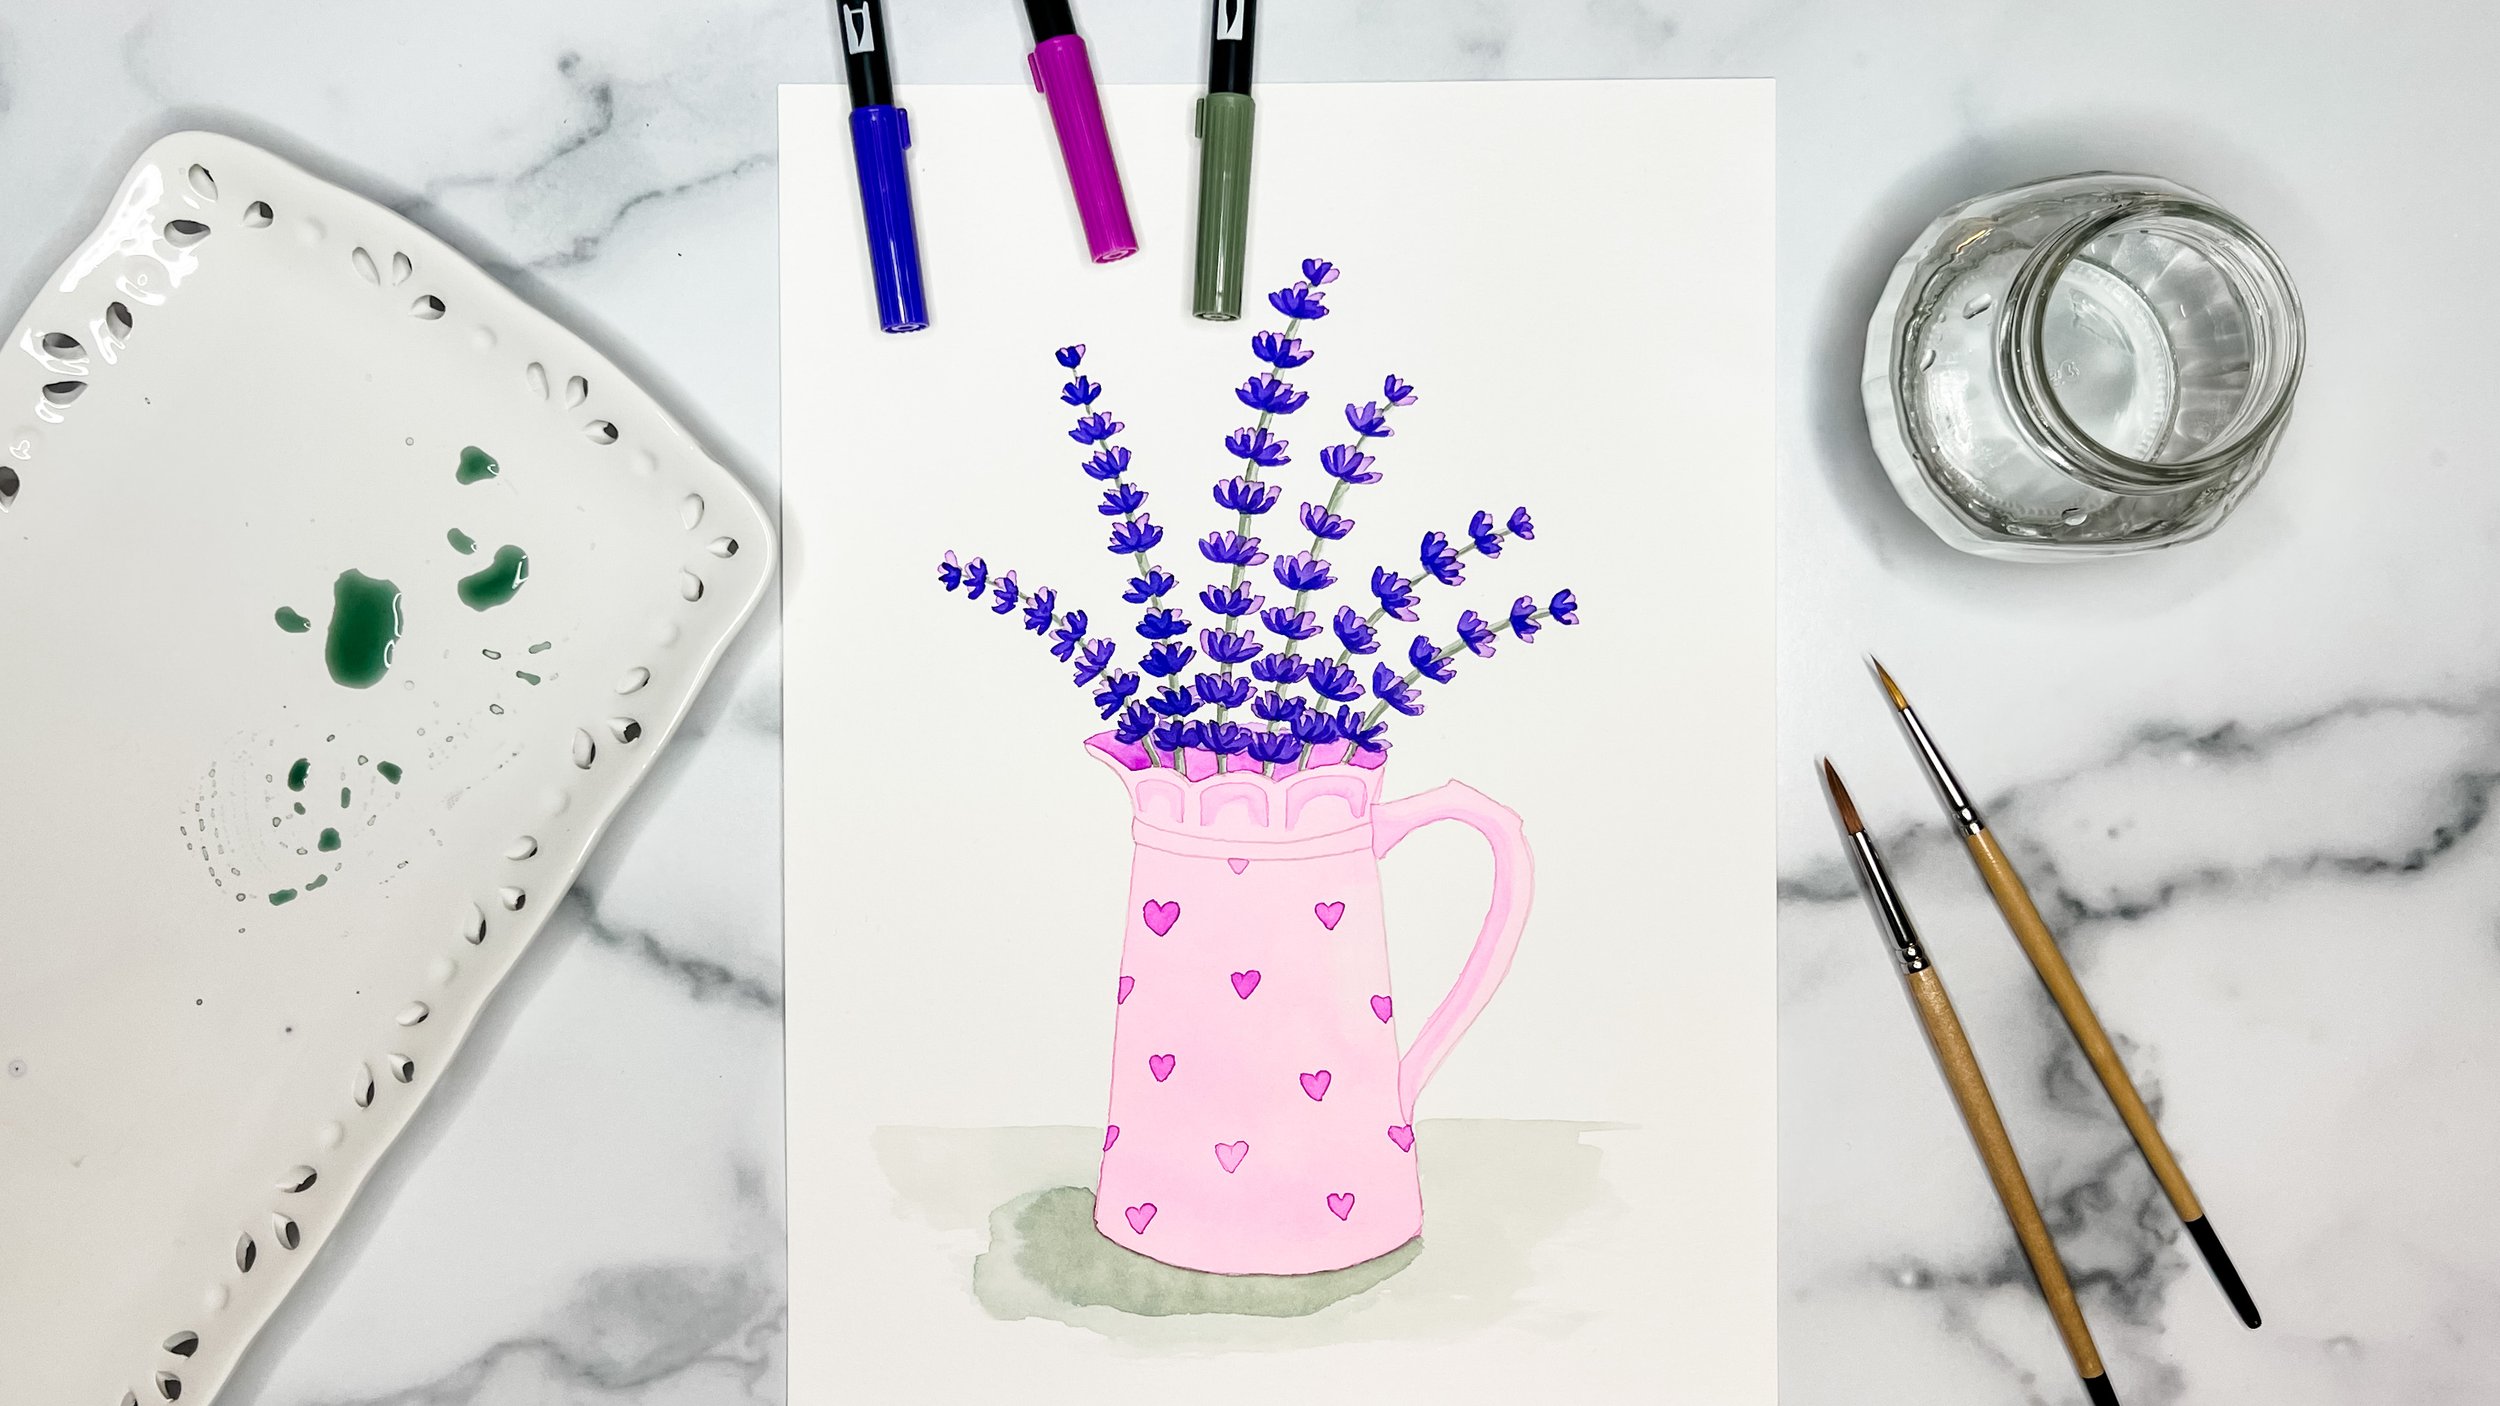 https://images.squarespace-cdn.com/content/v1/54a73b02e4b03ccd2a0583ab/784afe00-6042-4f05-bea0-36637a72dc7d/Jessica-Mack-Watercolor-Flowers-with-Markers-cover-image.JPG